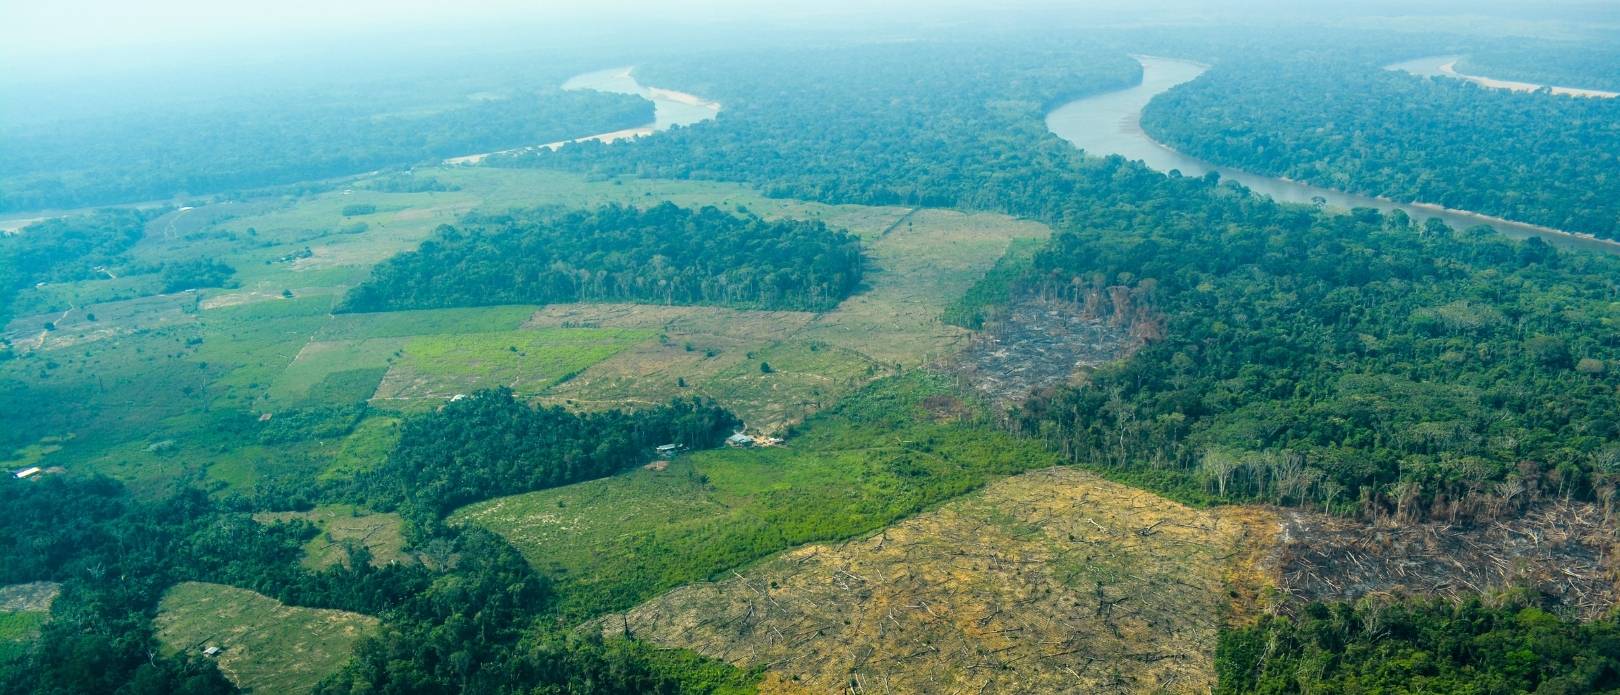 View of clear cut patch of the Amazonian rainforest in Colombia, with tree stubs and bare felled trees in the foreground and healthy rainforest in the bakground